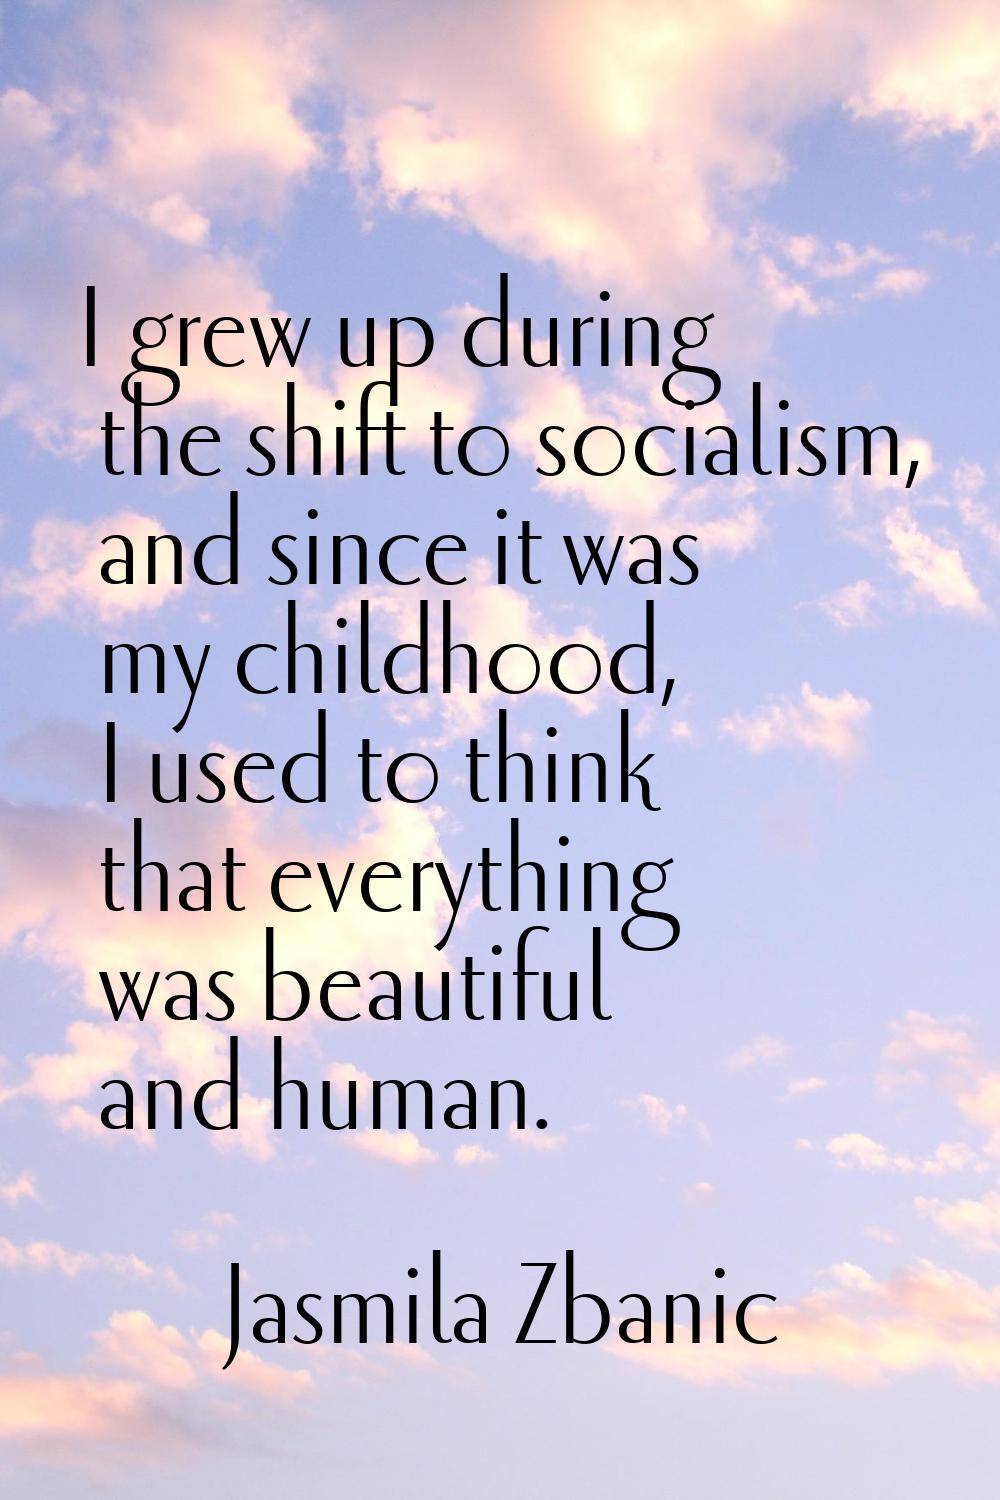 I grew up during the shift to socialism, and since it was my childhood, I used to think that everyt